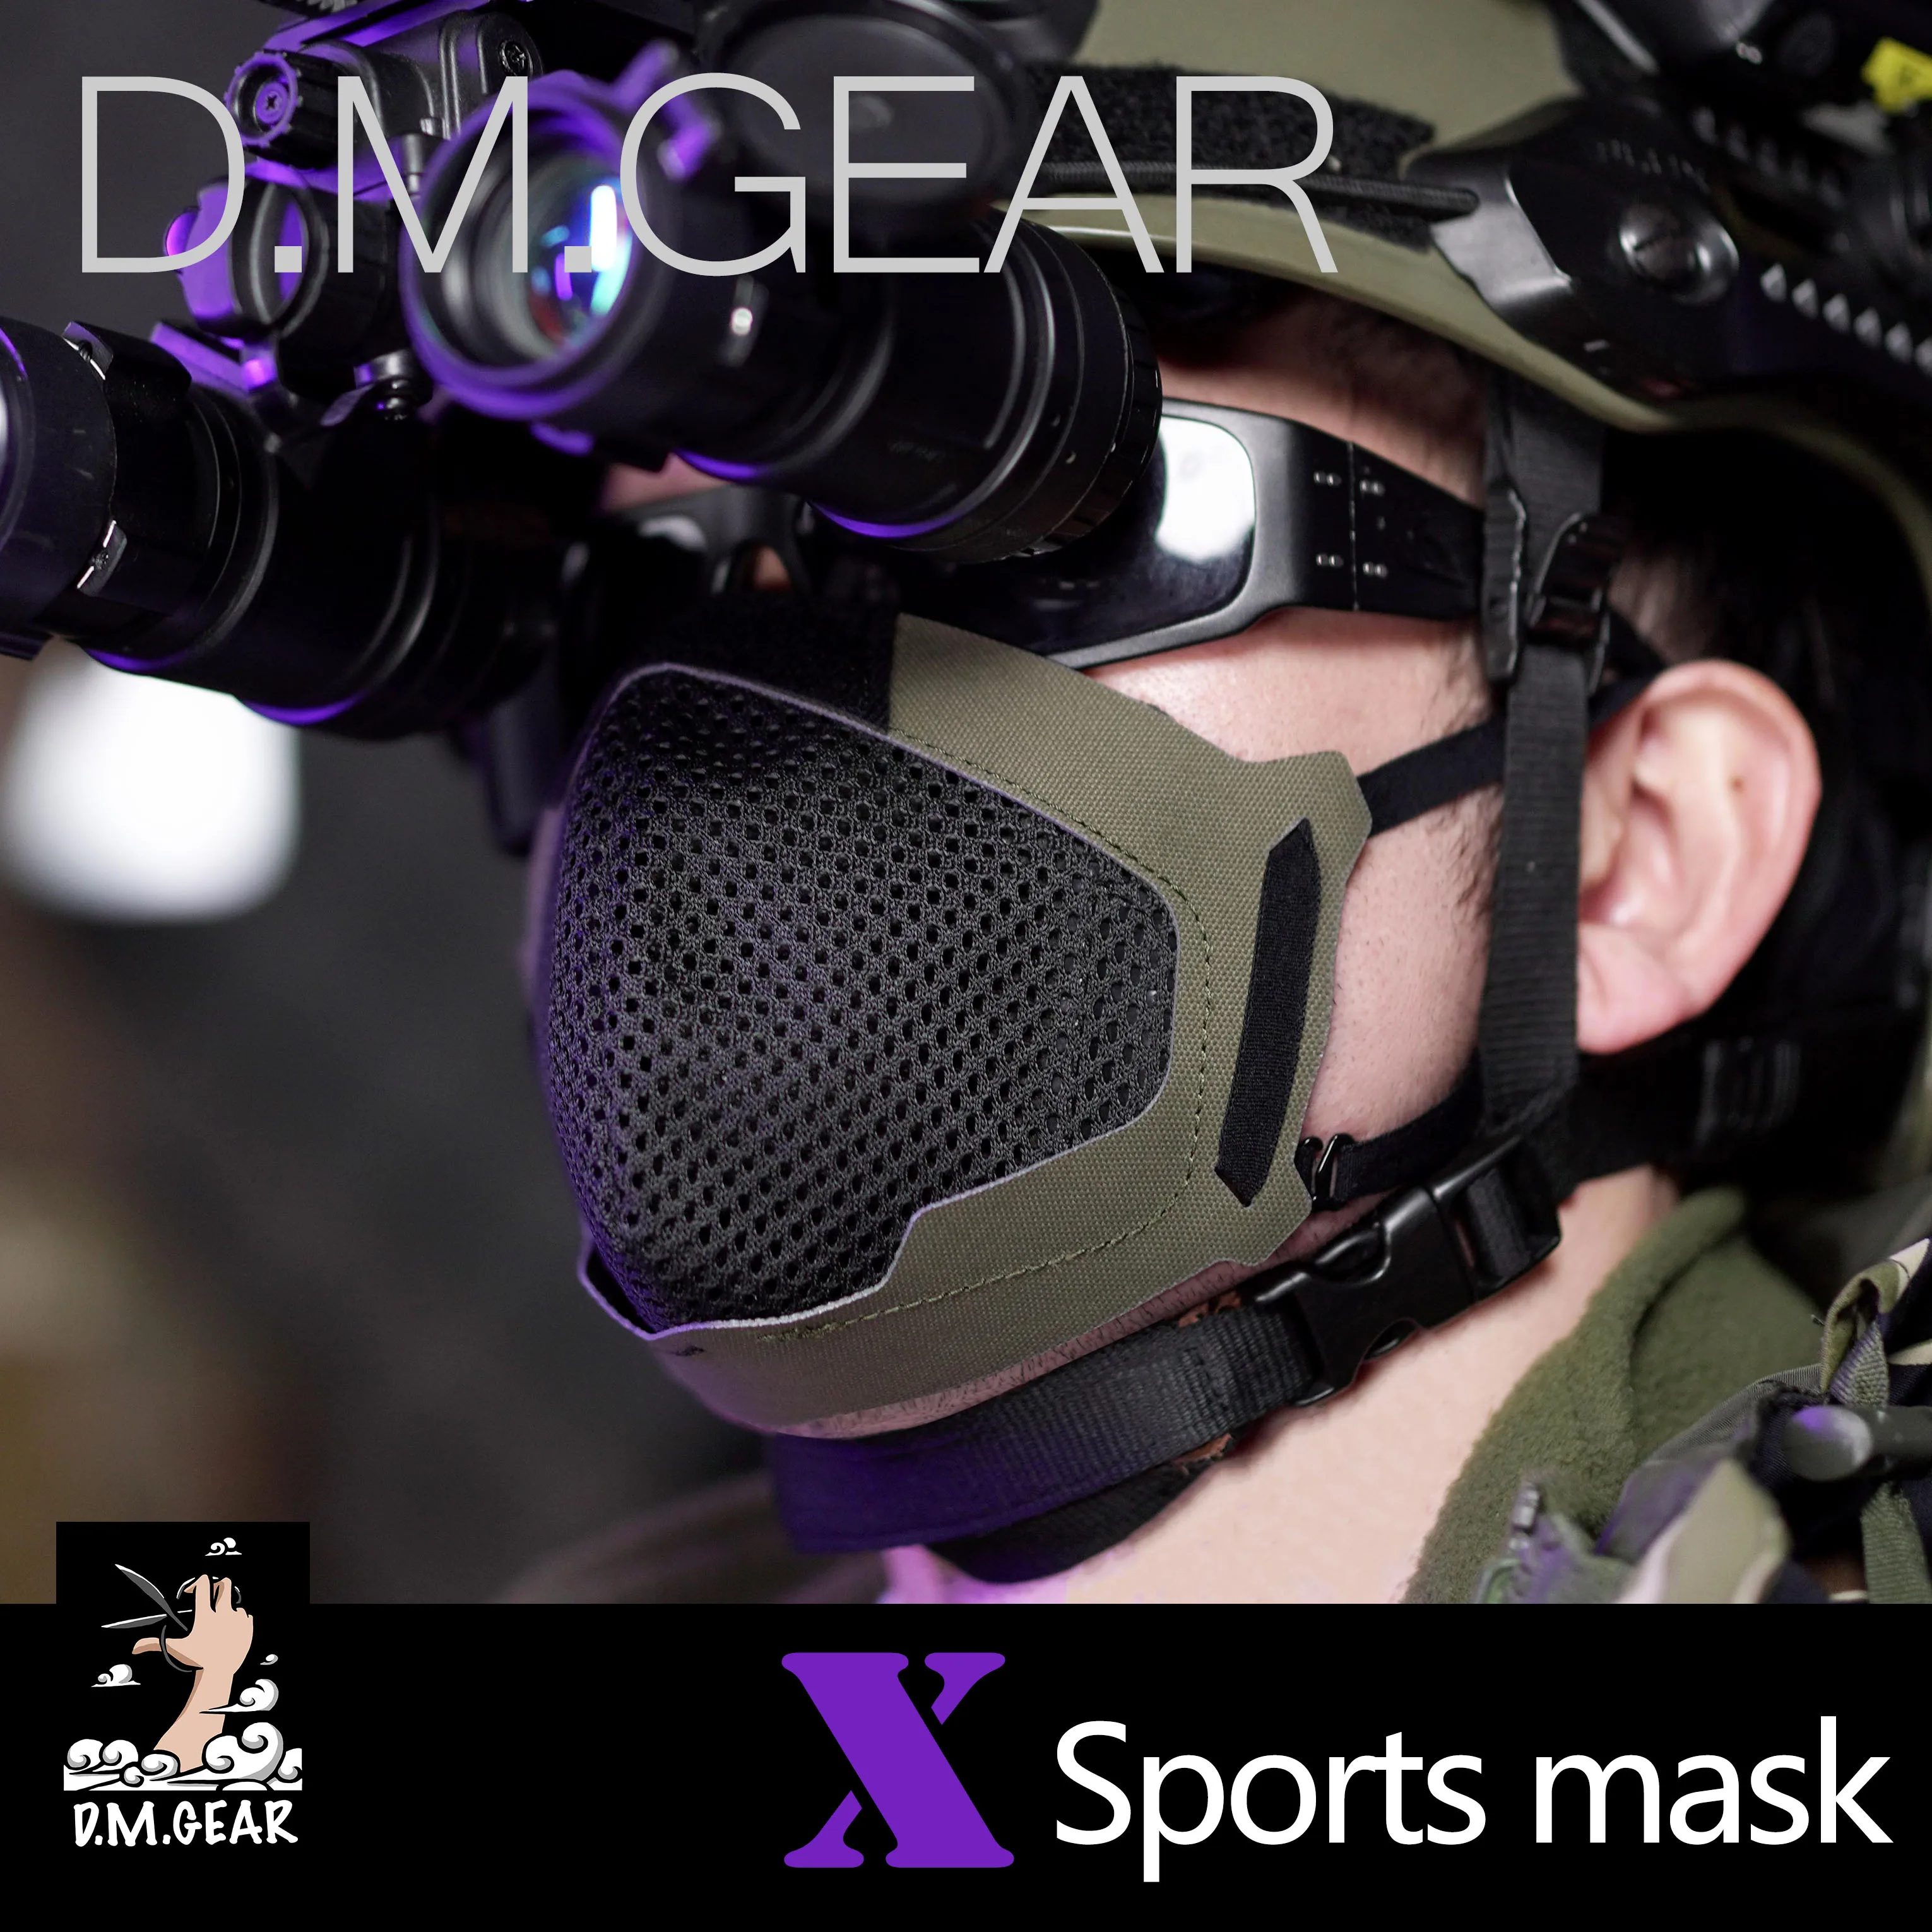 

DMGear Tactical X Sports Mask Anti-Fog Dust Multi-function Hunting Gear Military Equipment Airsoft Accessories Army EDC